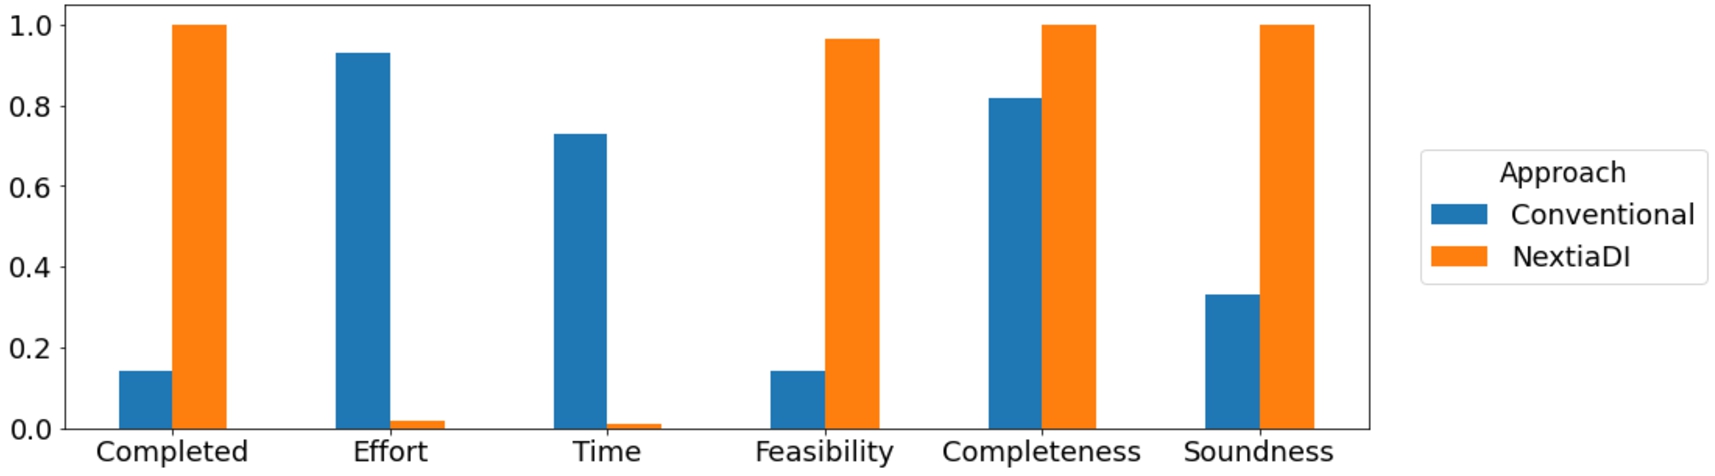 Aggregated results for the mapping generation phase. Completed specifies whether participants finished the task within the available time (higher is better). Effort and Time indicate, respectively, the perceived effort and time to complete the task (lower is better). Feasible is used to quantify the perceived feasibility of the task in Big Data settings (higher is better). Completeness and Soundness refer to the quality metrics previously introduced.